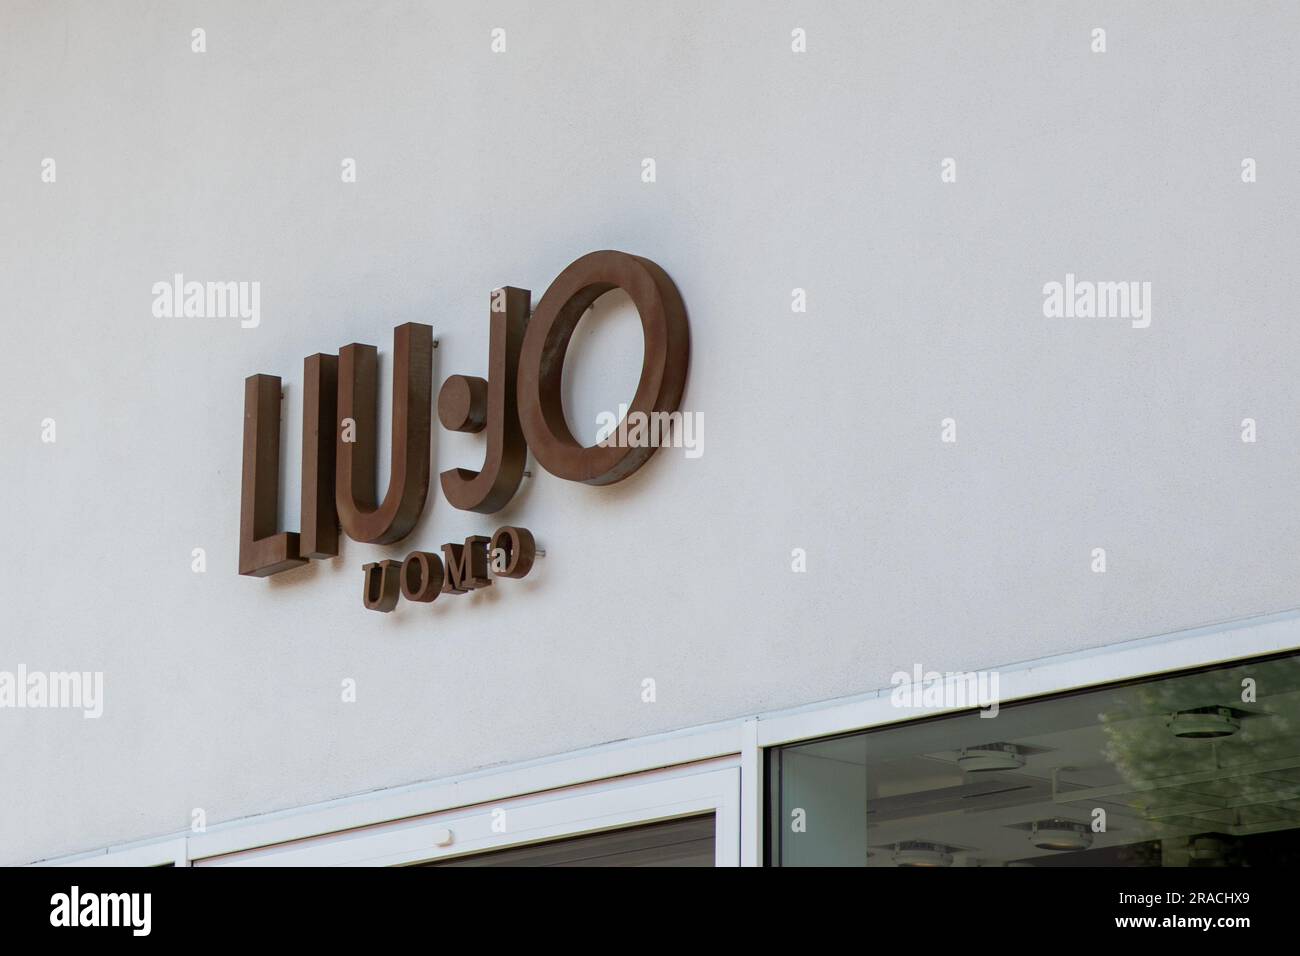 Bordeaux ,  France - 06 27 2023 : liu jo uomo facade sign logo brand and text sign at entrance of fashionable textile store of fashion commercial clot Stock Photo